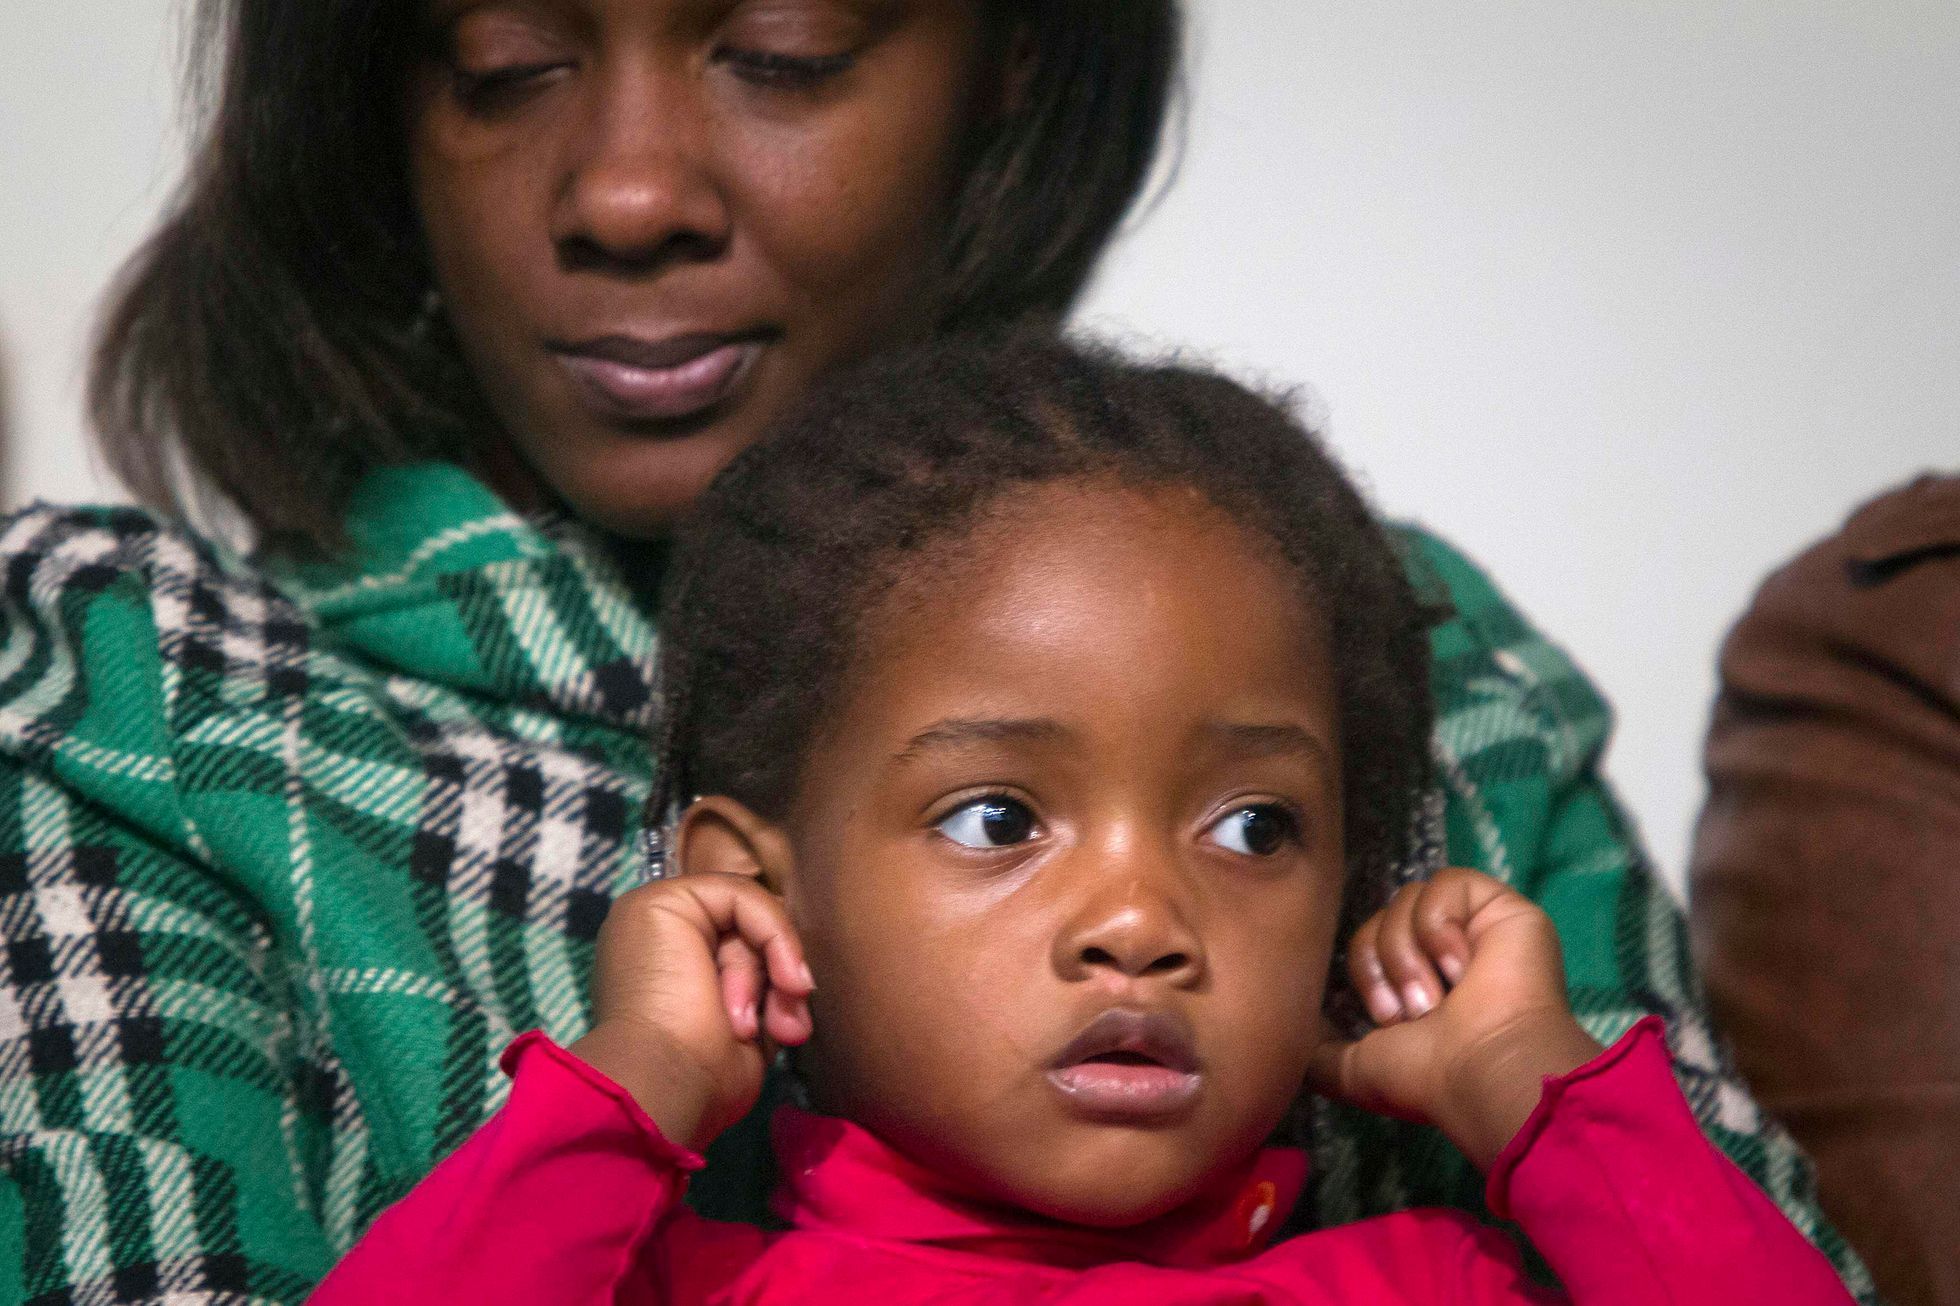 Akai Gurley's daughter Akaila sits on her mother Kimberly Ballinger's lap and plugs her ears as civil rights activist Reverend Al Sharpton speaks in the Harlem Borough of New York